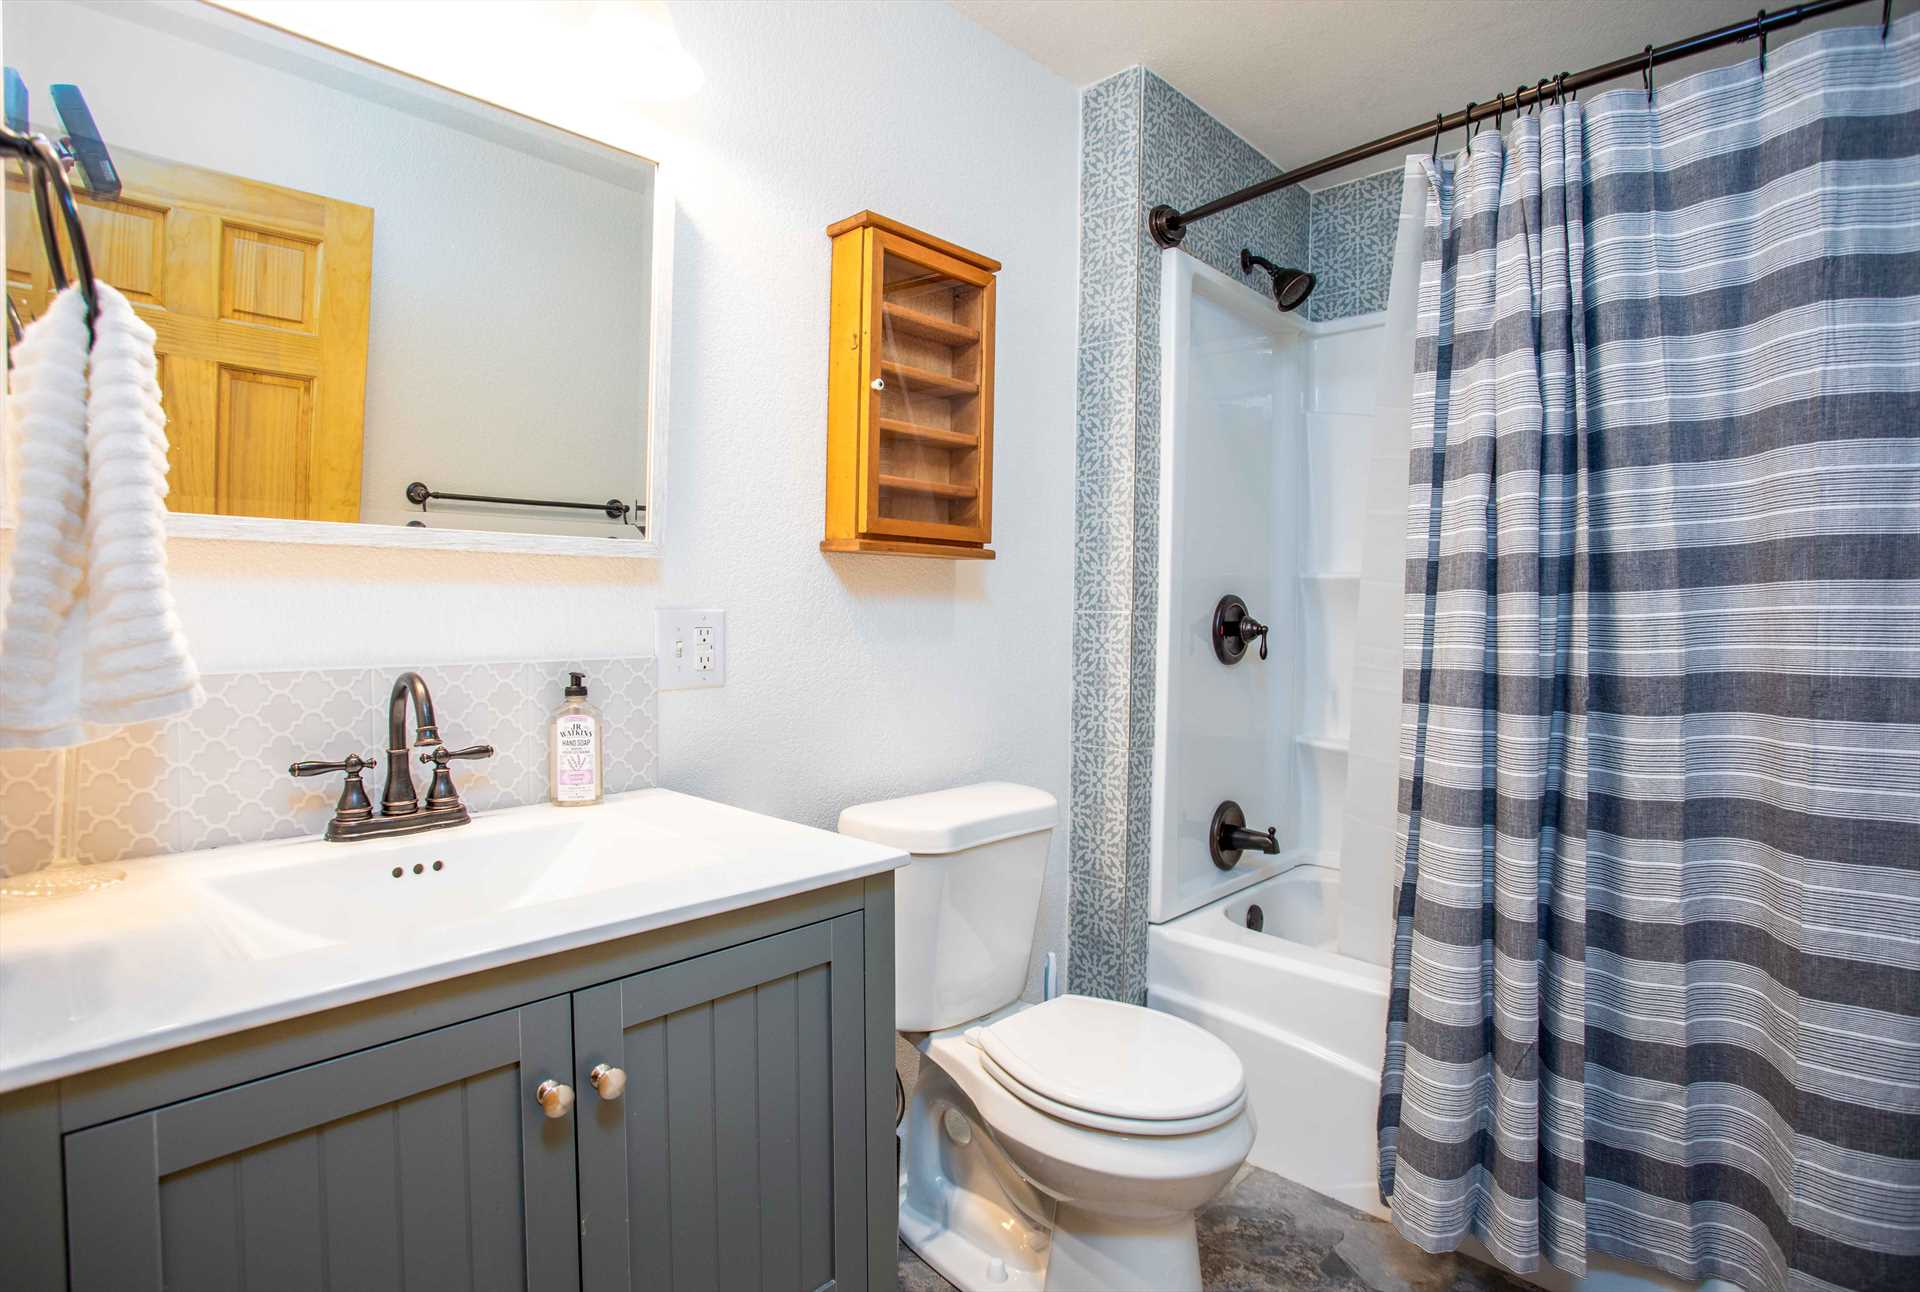                                                 The tidy master bathroom is furnished with a shower and tub combo, and fresh bath linens are provided for both baths.